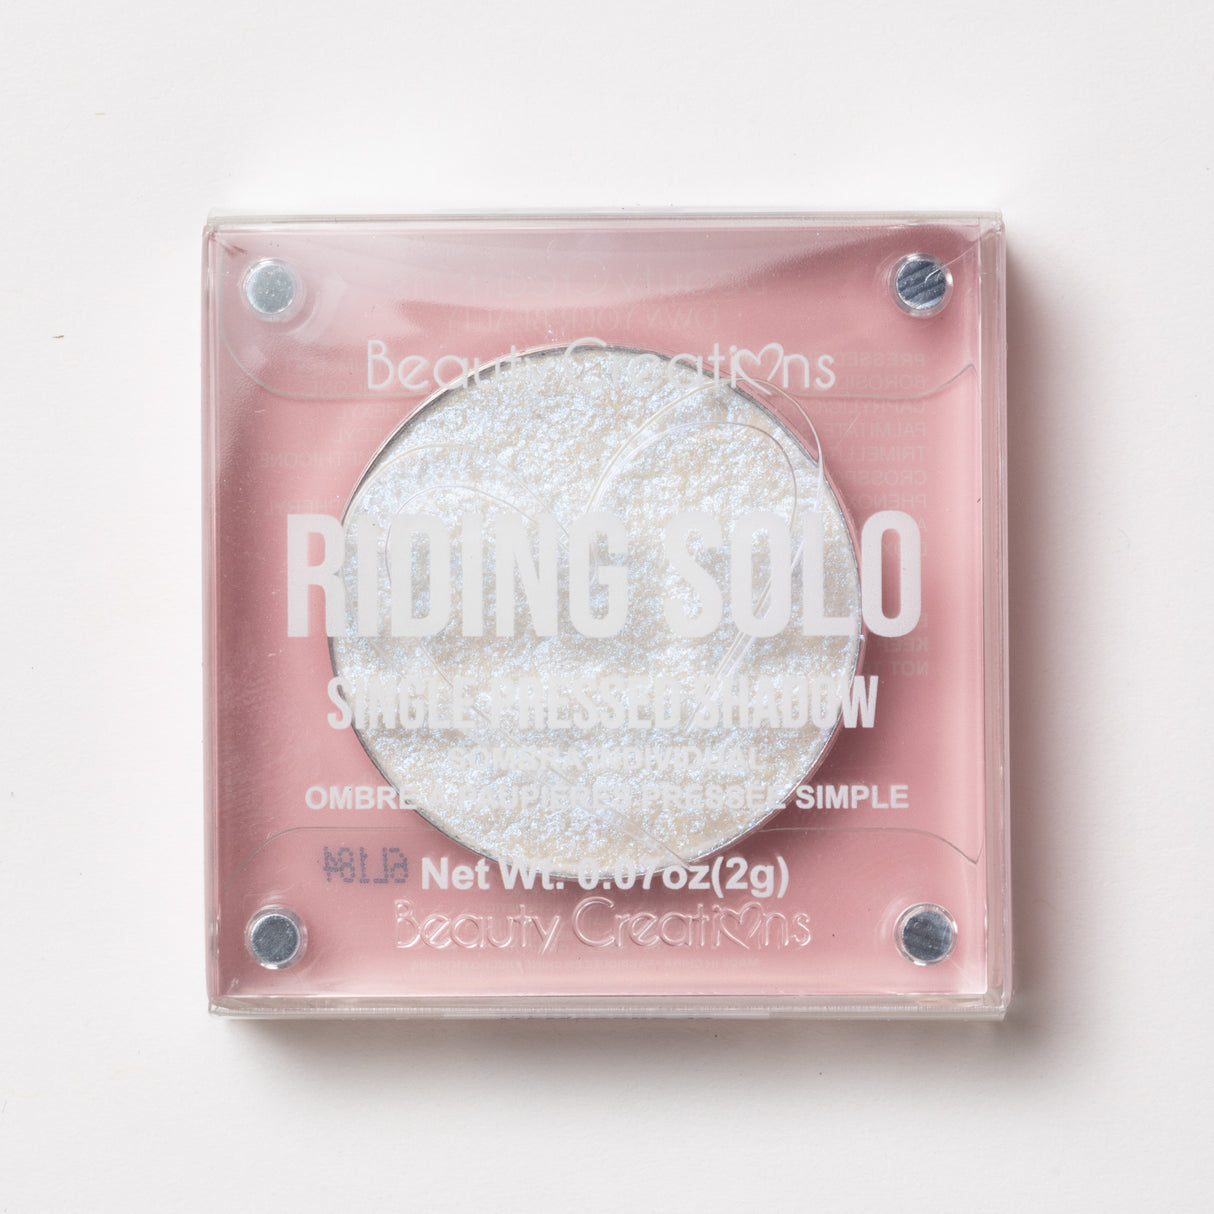 BEAUTY CREATIONS - RIDING SOLO SINGLE PRESSED SHADOW